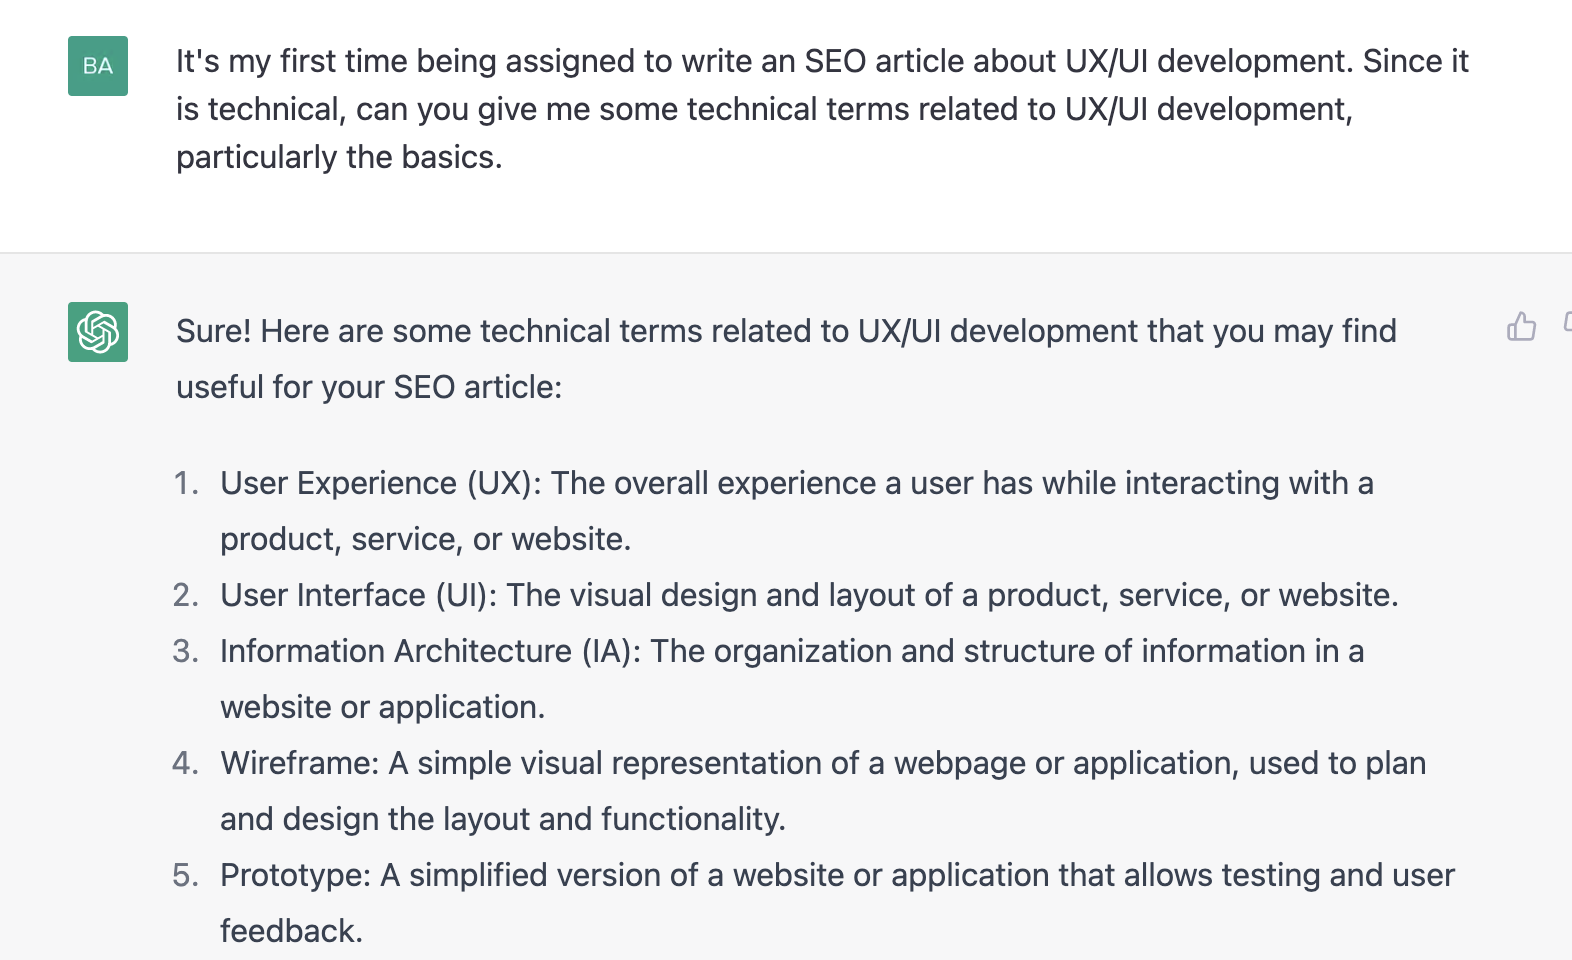 ChatGPT prompt about giving technical terms related to UX/UI development